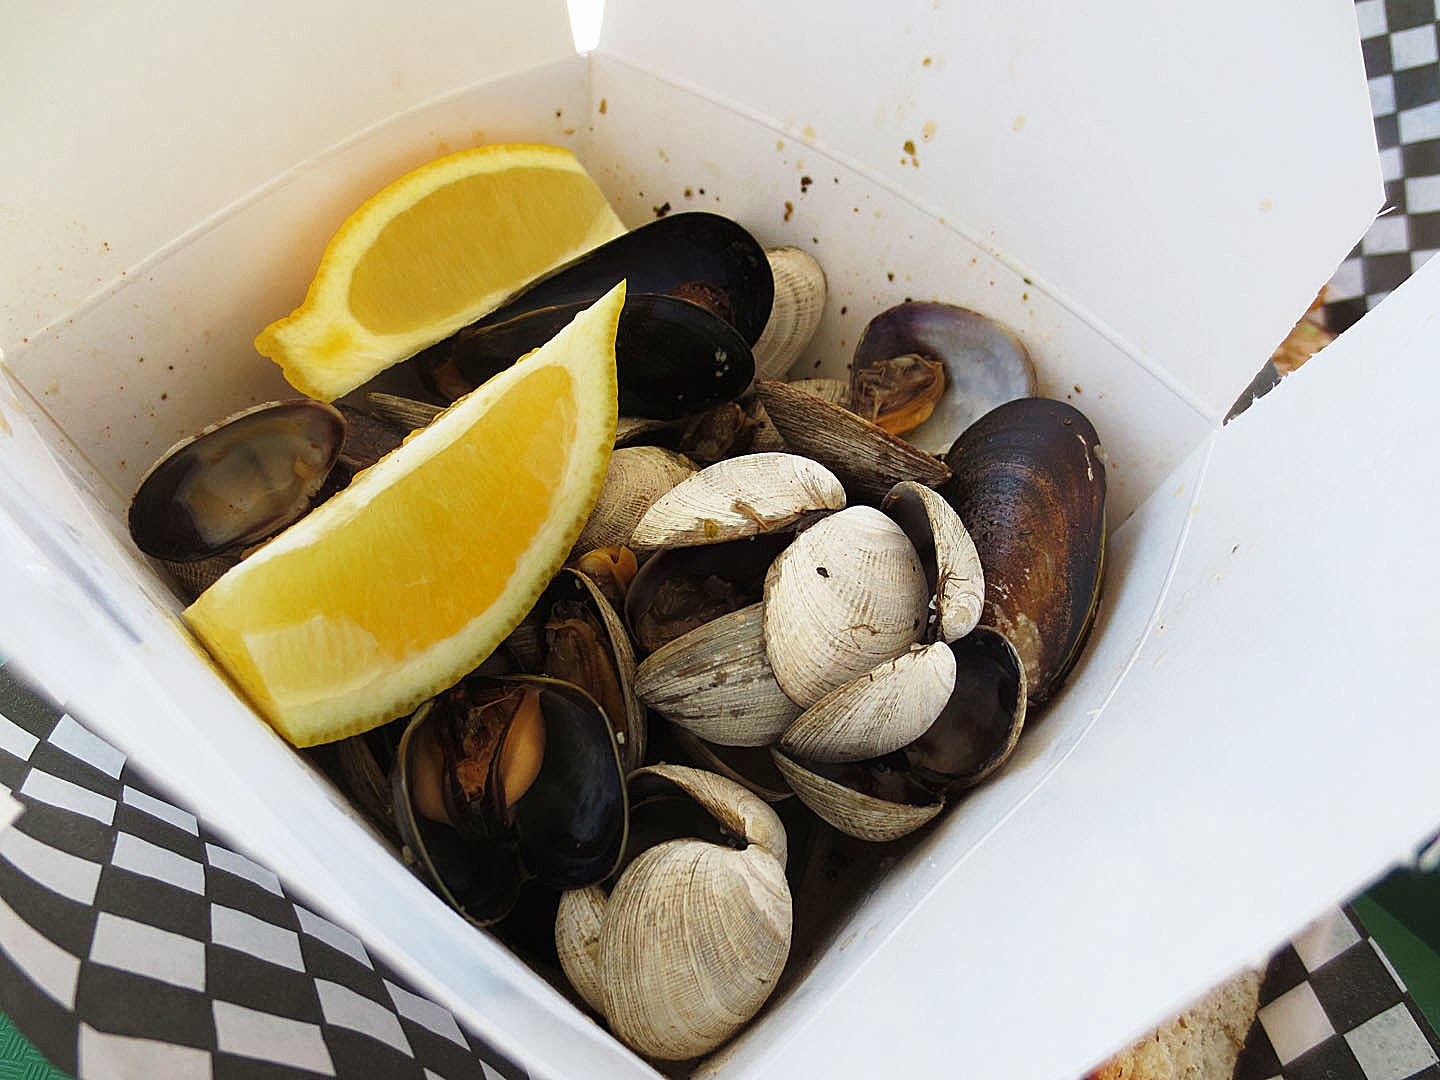 Steamed clams and mussels in garlic butter sauce